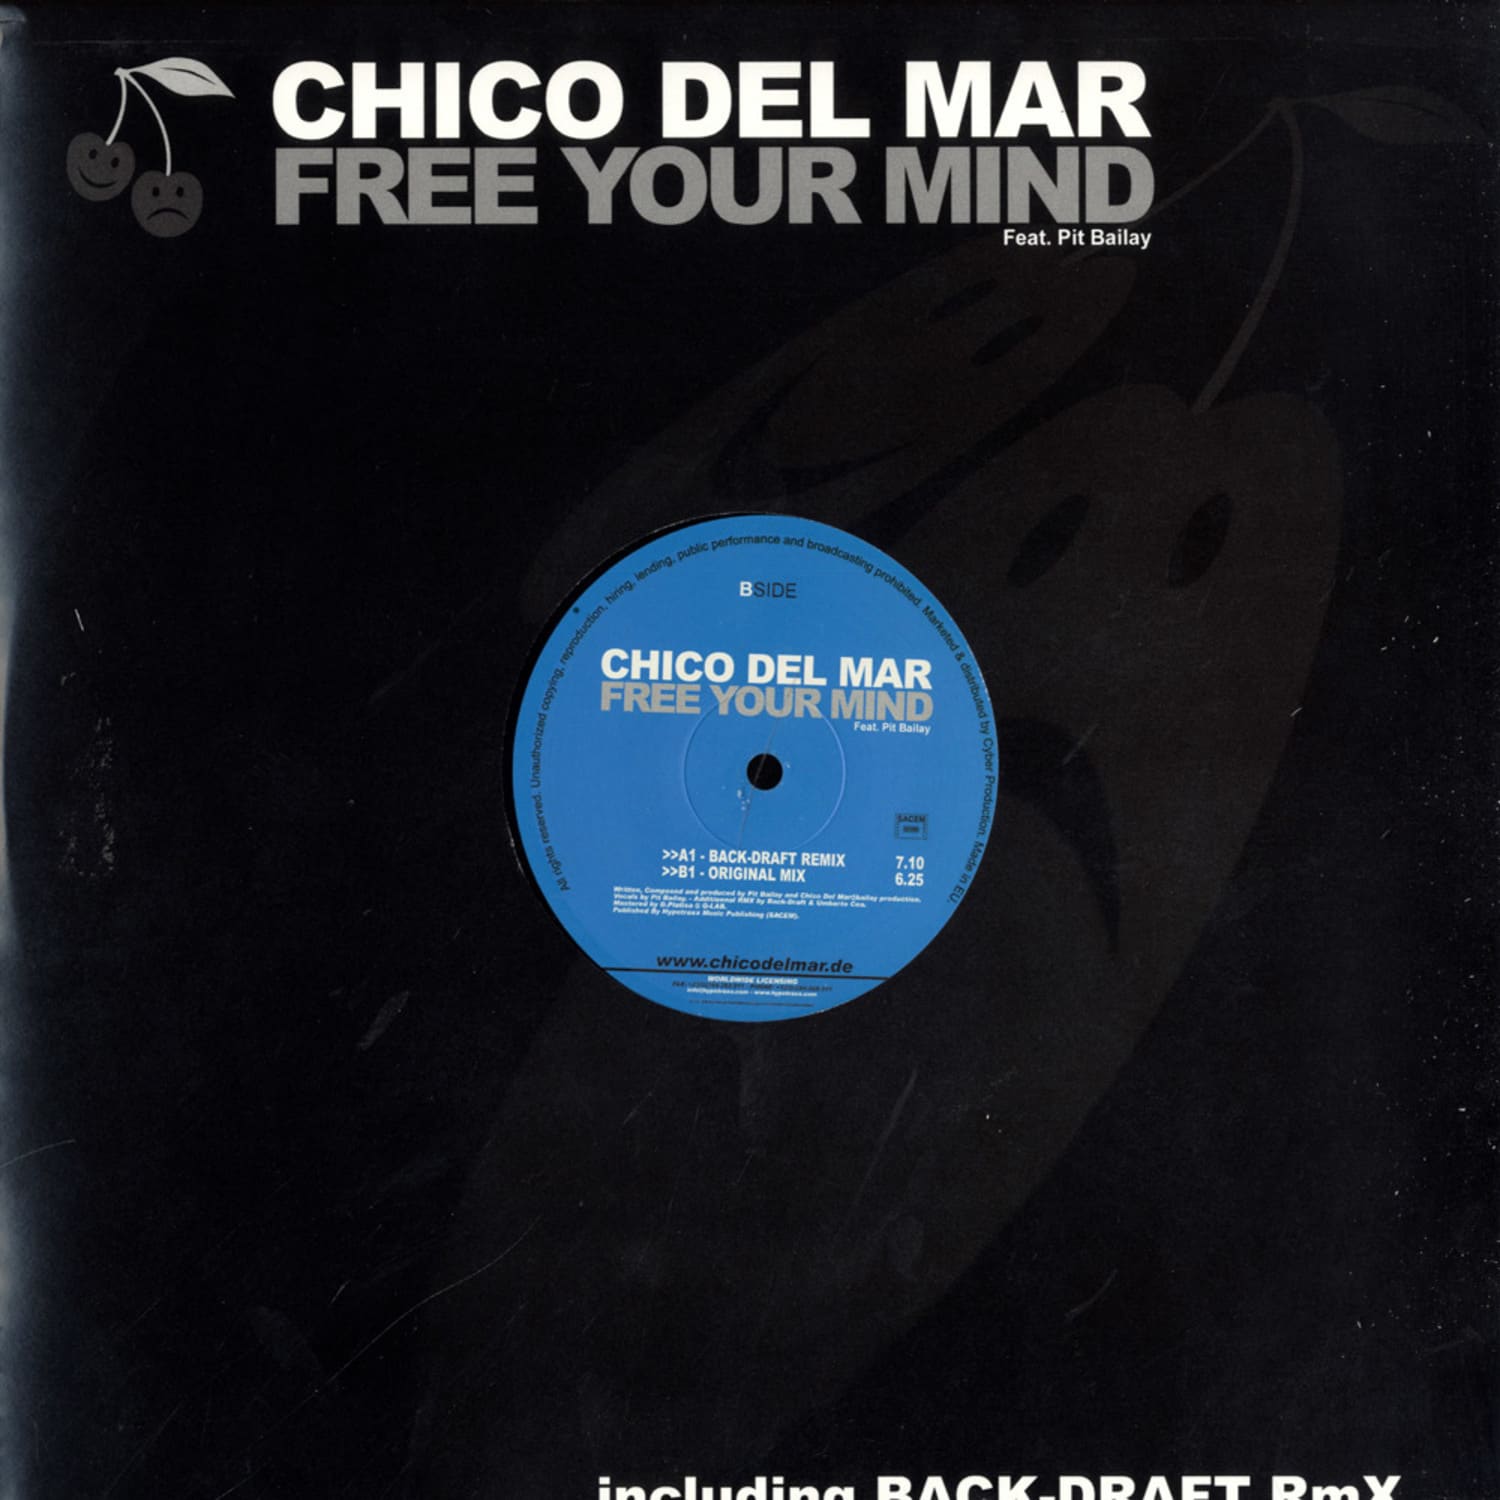 Chico Del Mar feat. Pit Bailay - FREE YOUR MIND